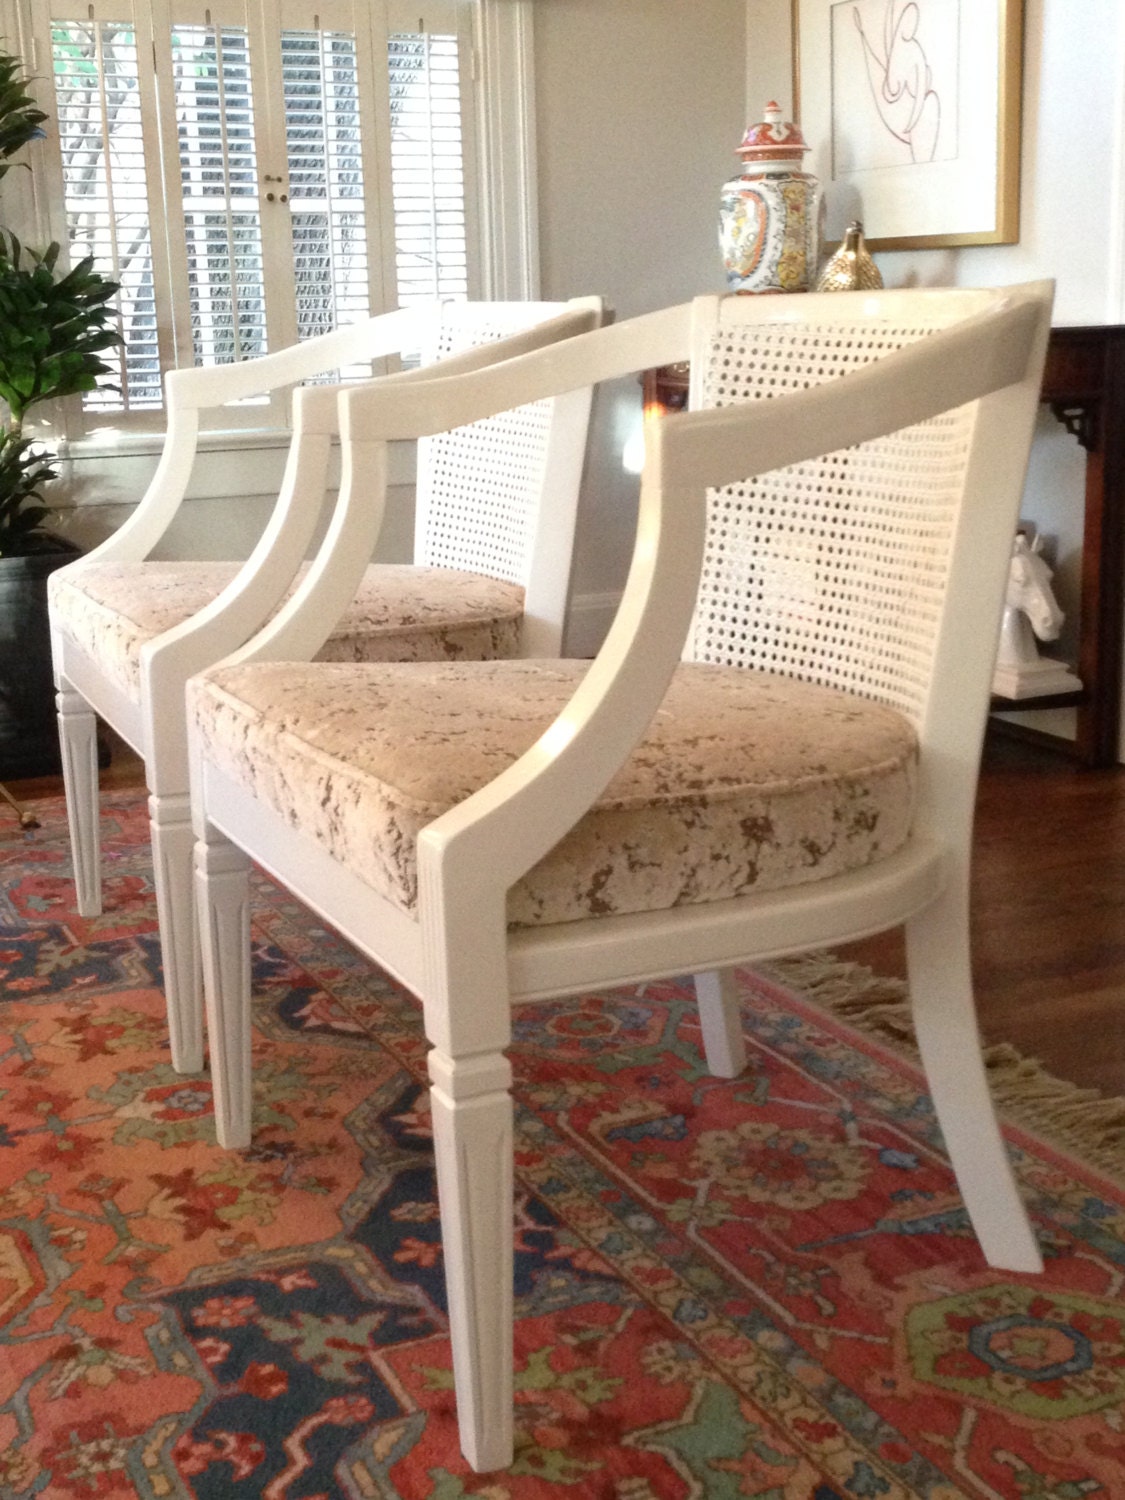 Vintage Cane Barrel Chairs a pair